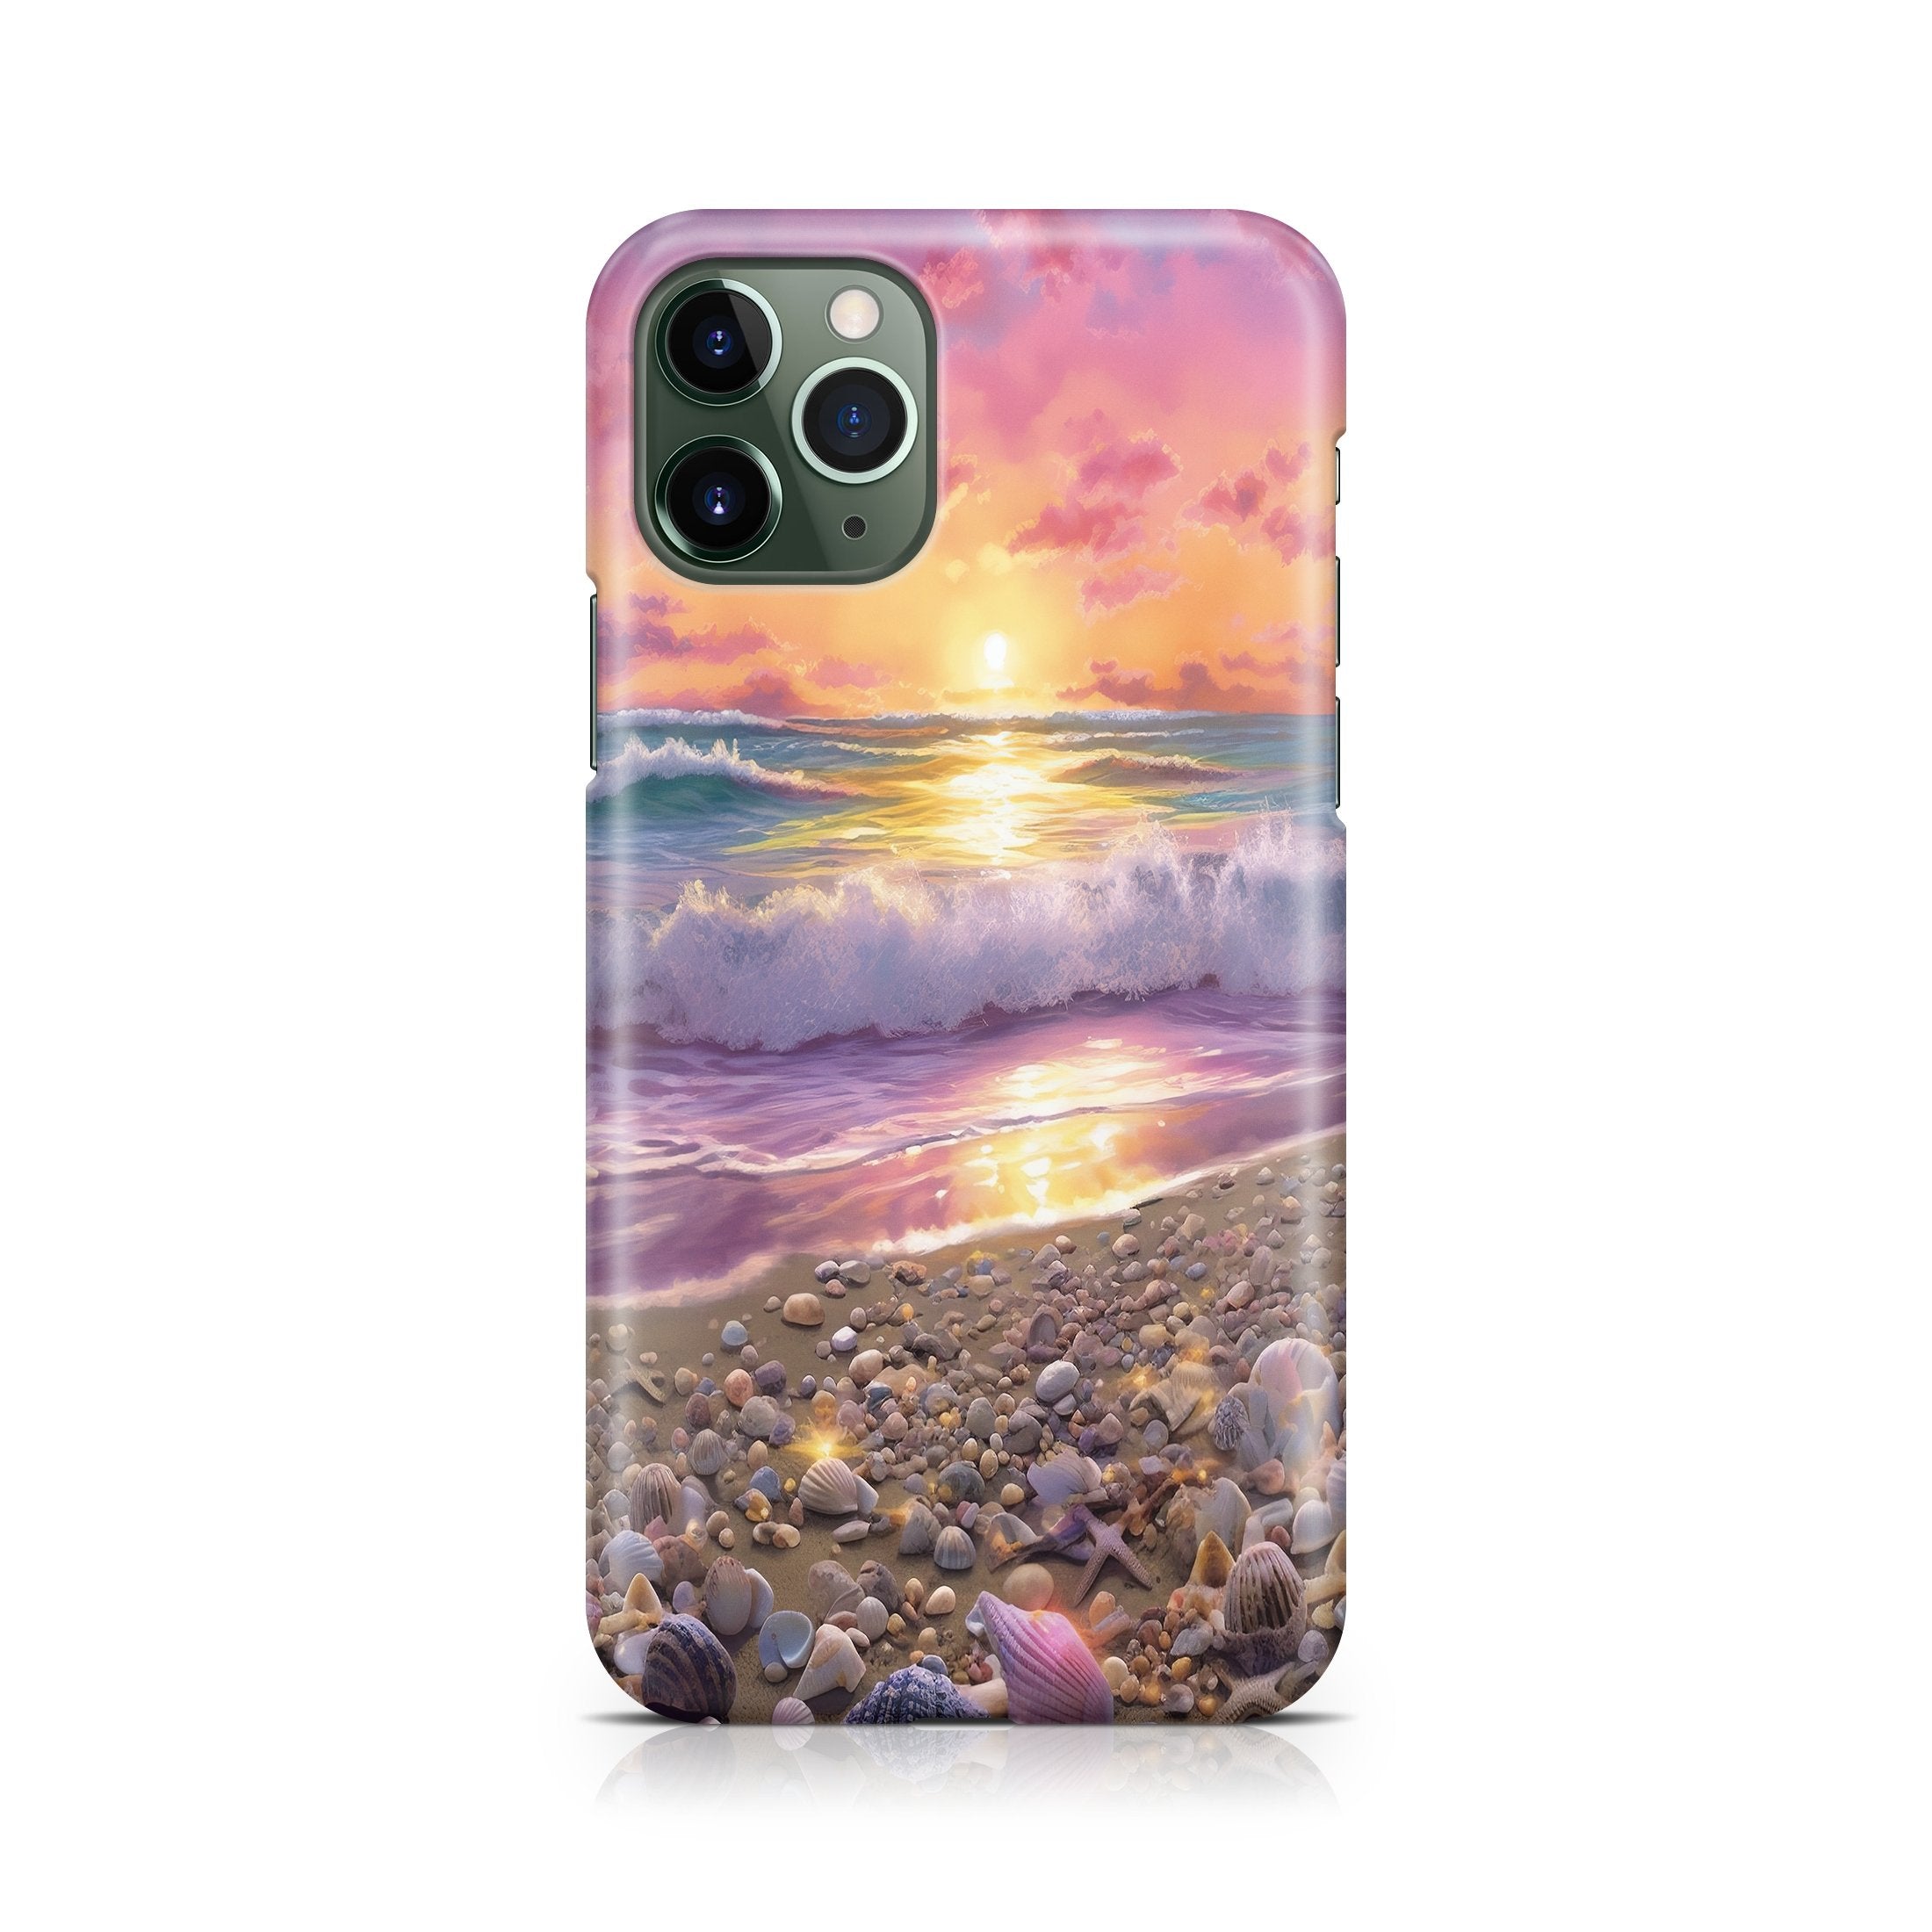 Summer Dreams - iPhone phone case designs by CaseSwagger